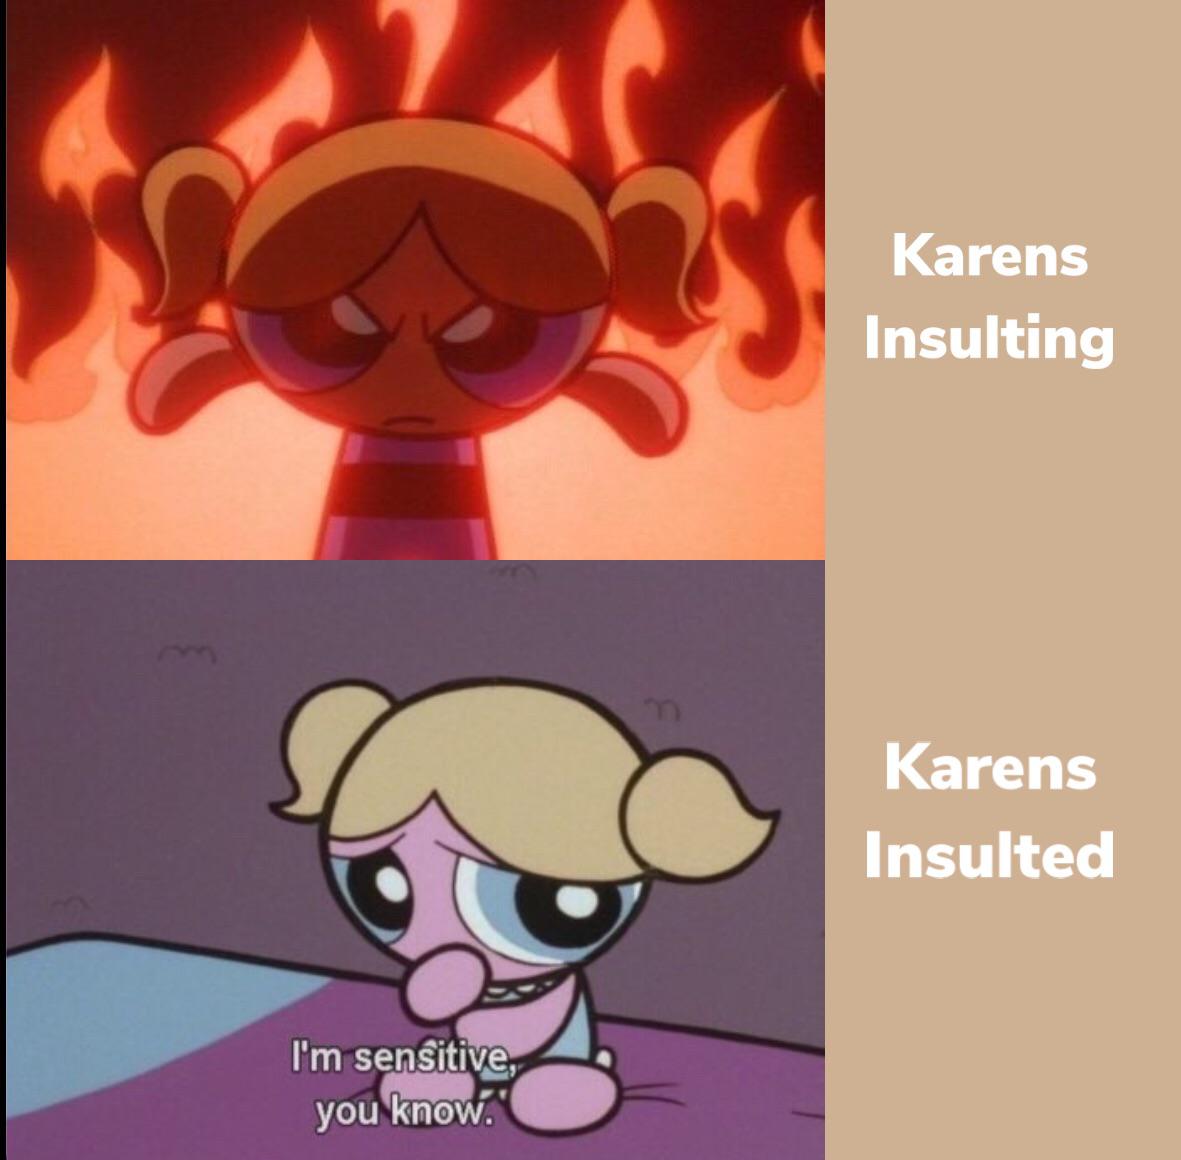 aesthetic mood bubbles powerpuff girls - Karens Insulting Karens Insulted I'm sensitive, you know.